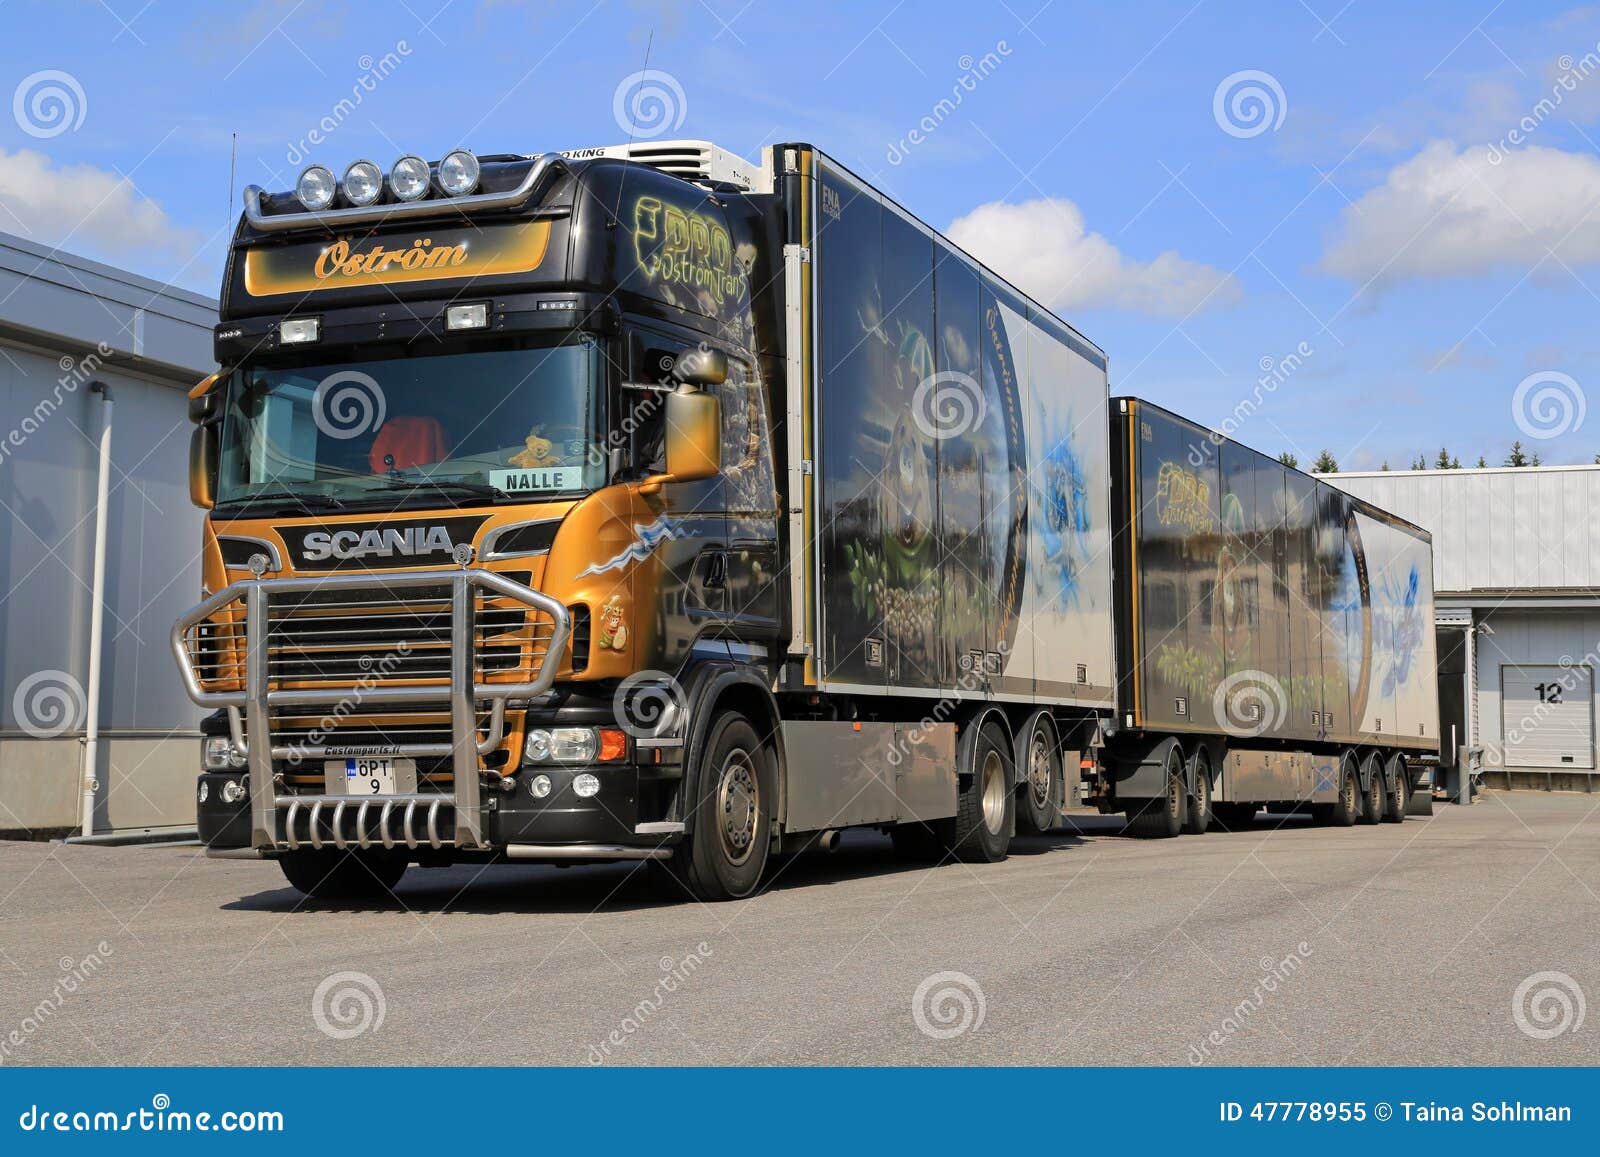 https://thumbs.dreamstime.com/z/accessorized-scania-v-trailer-truck-transports-frozen-food-forssa-finland-august-to-warehouse-commodity-industry-47778955.jpg